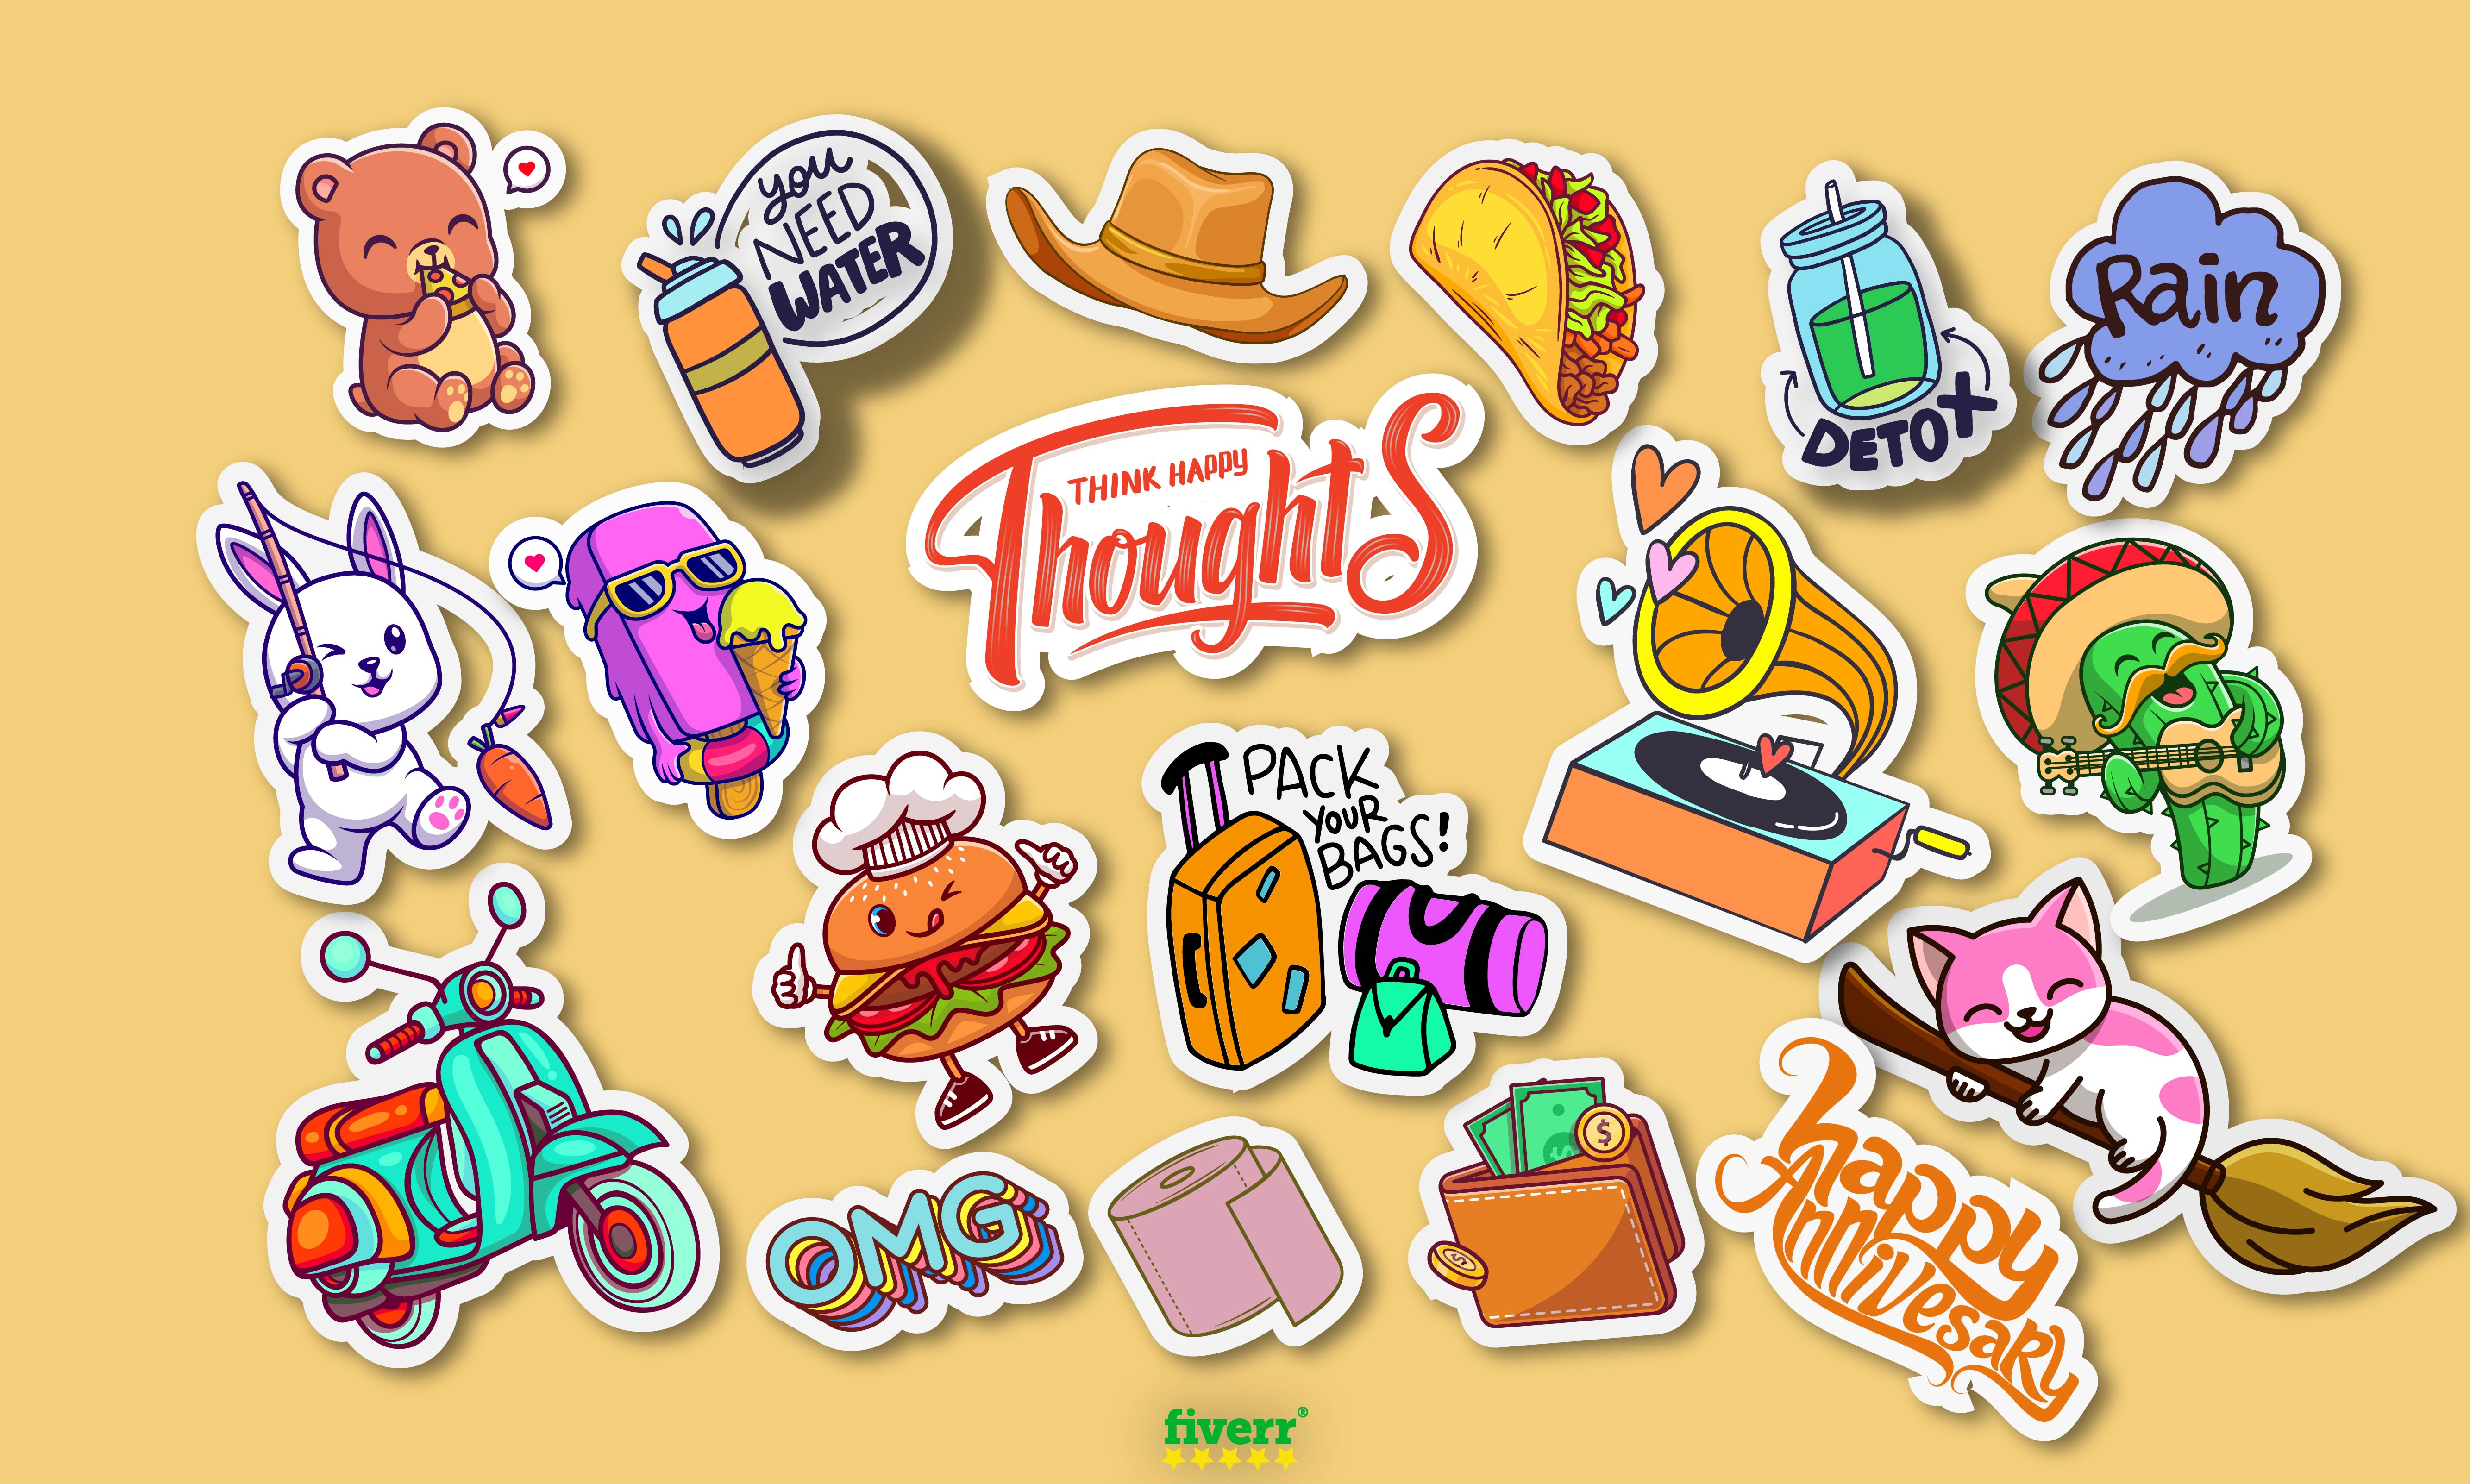 Omg Stickers - Free communications Stickers